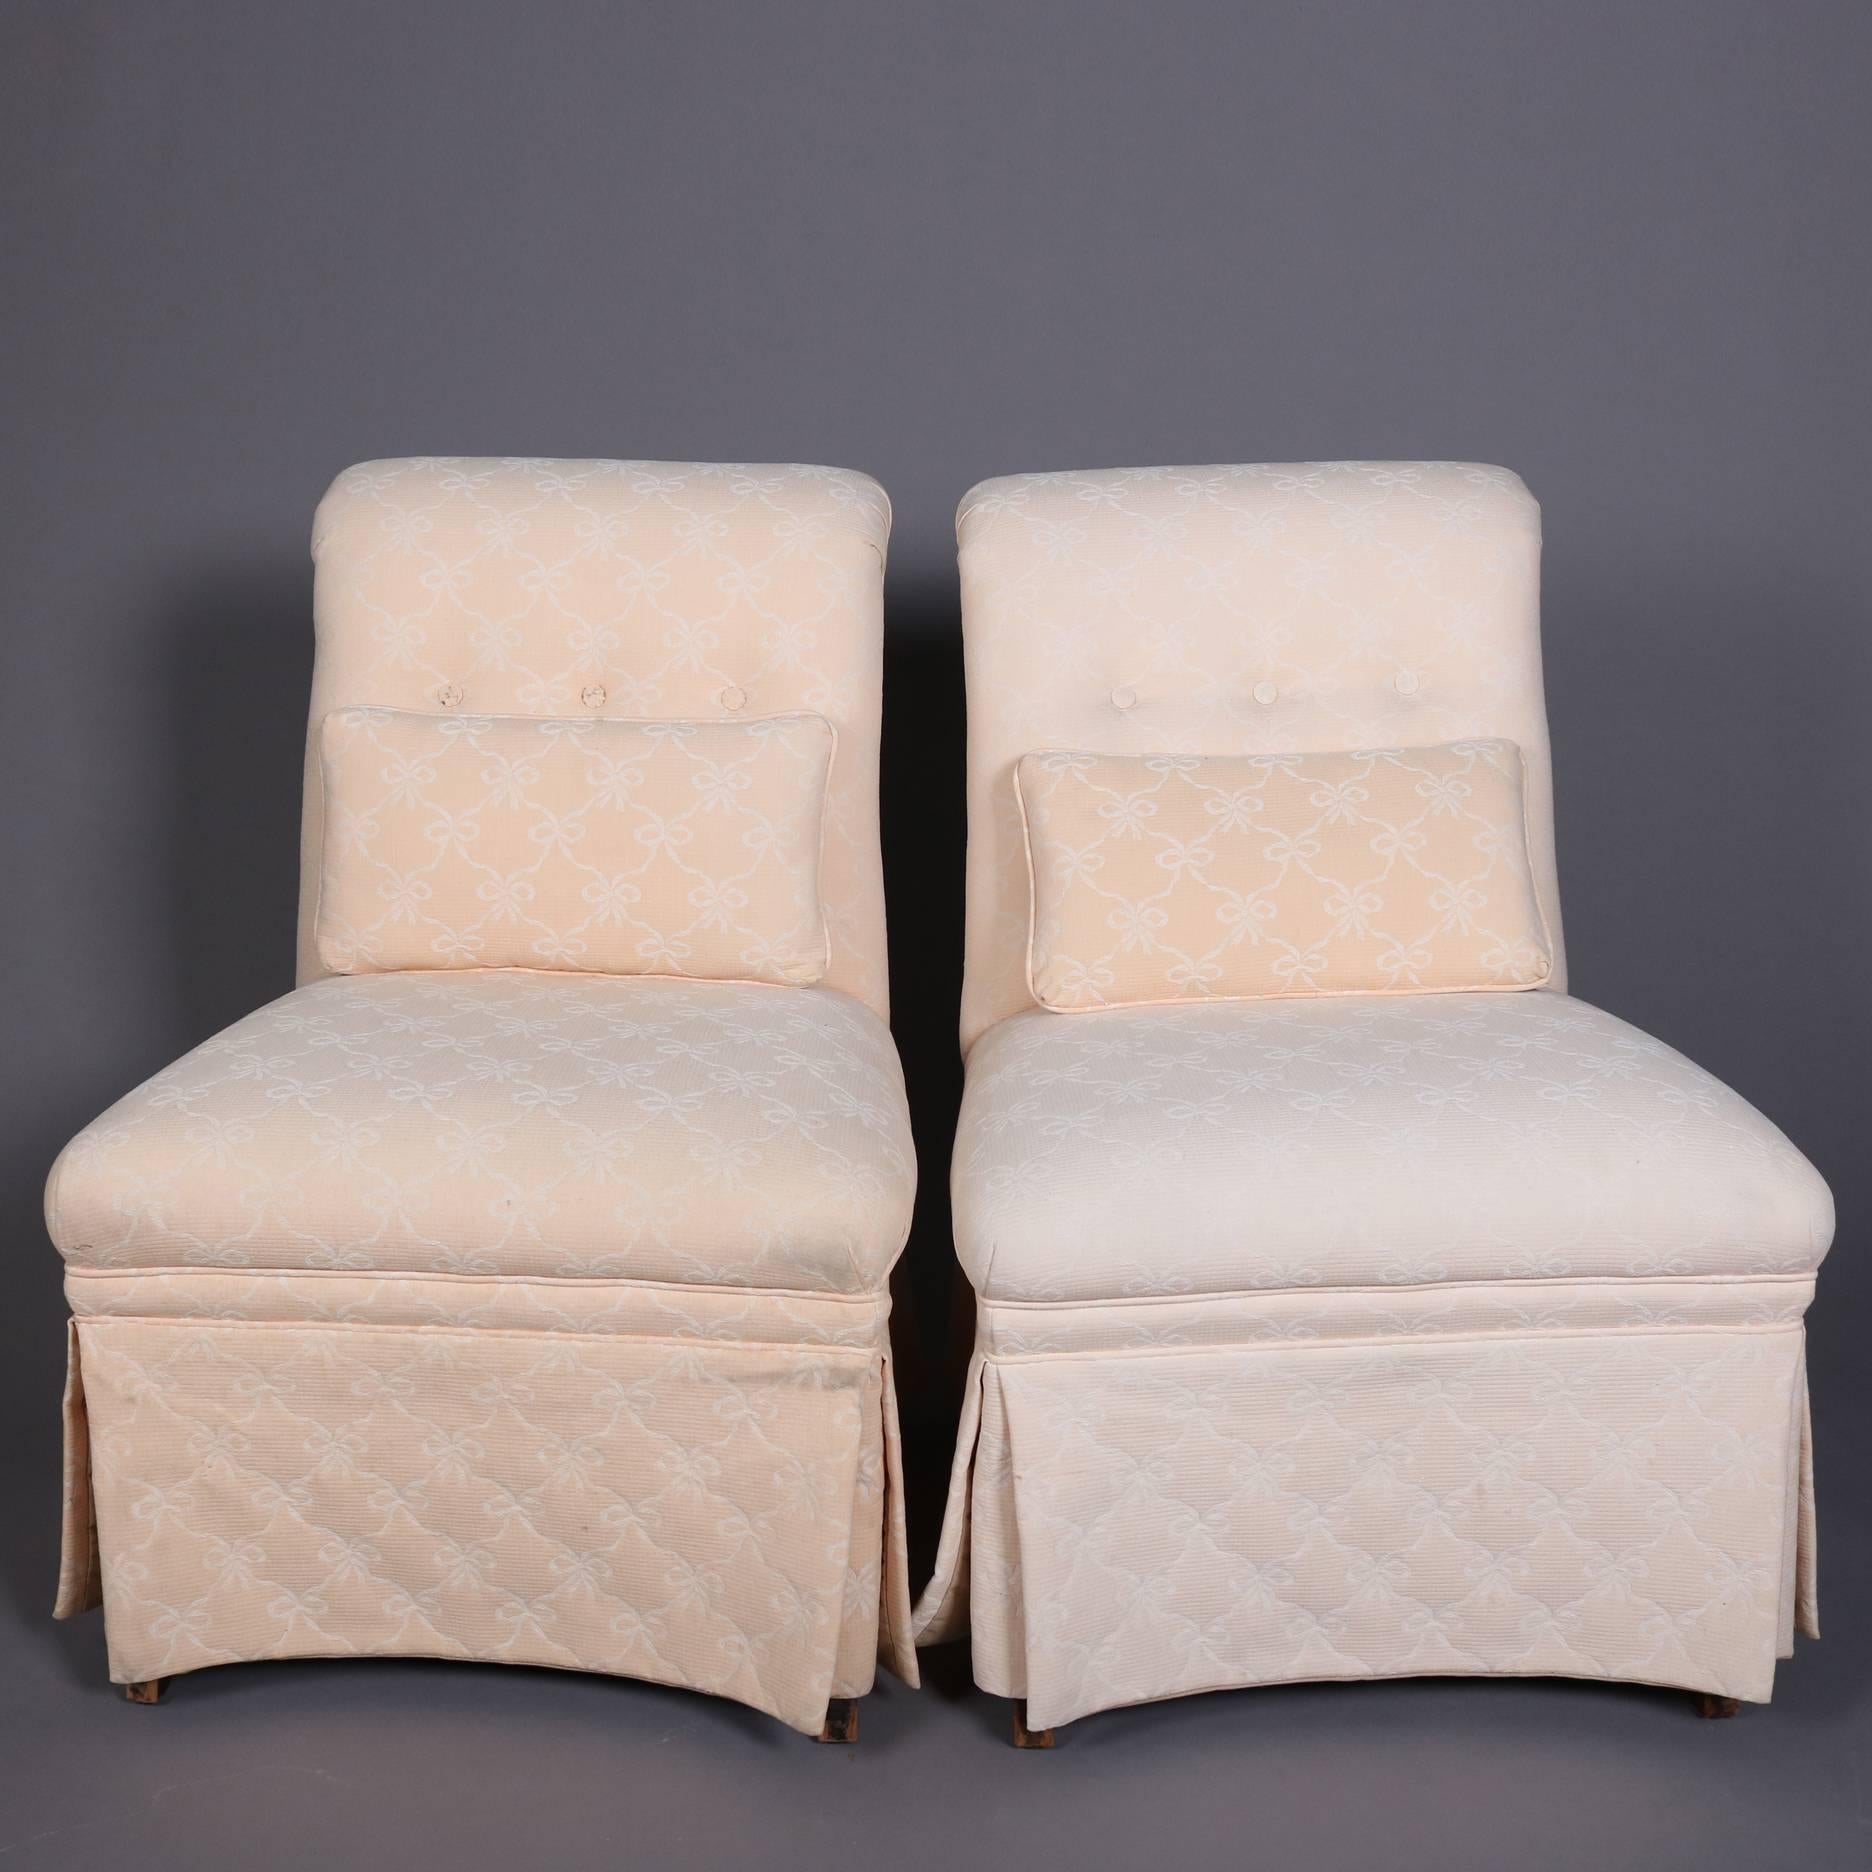 Pair of Vintage Petite Scroll Back Upholstered Slipper Chairs, 20th Century 2